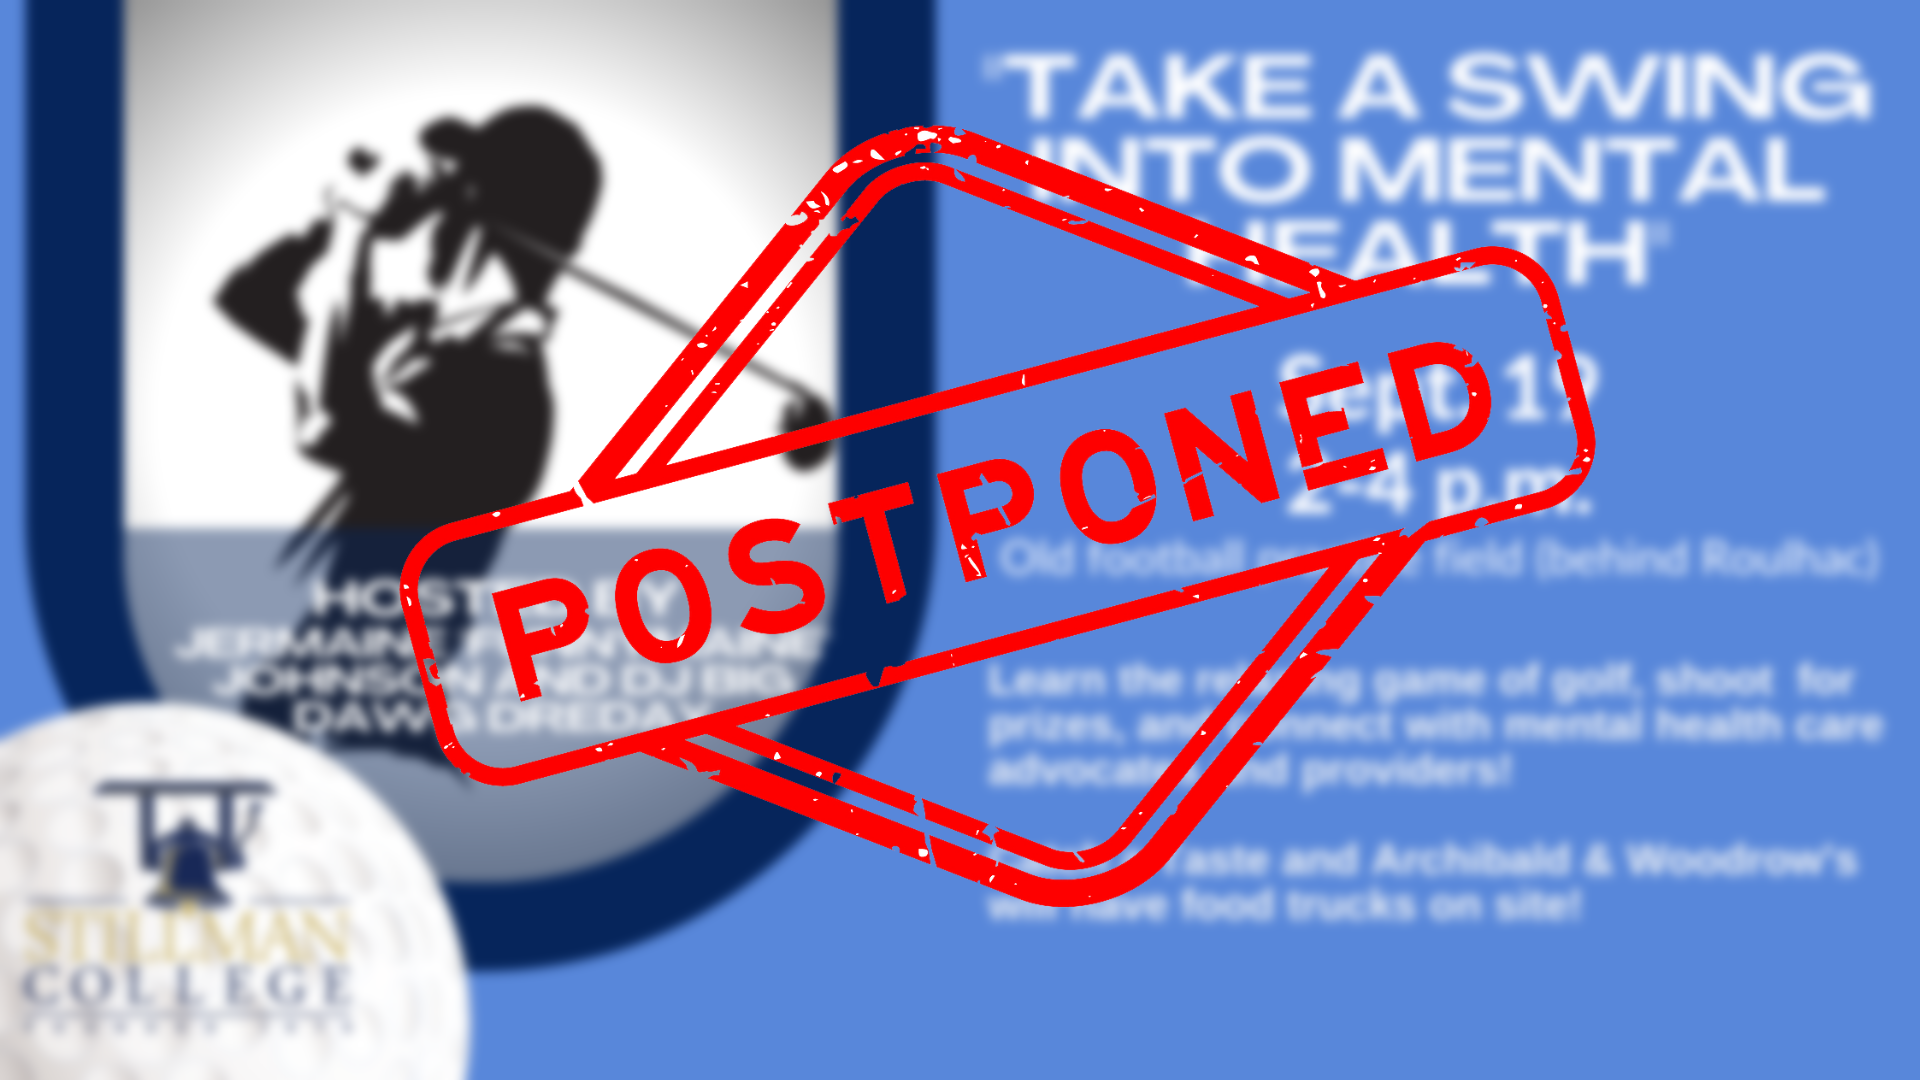 A graphic announcement that a golf event has been postponed